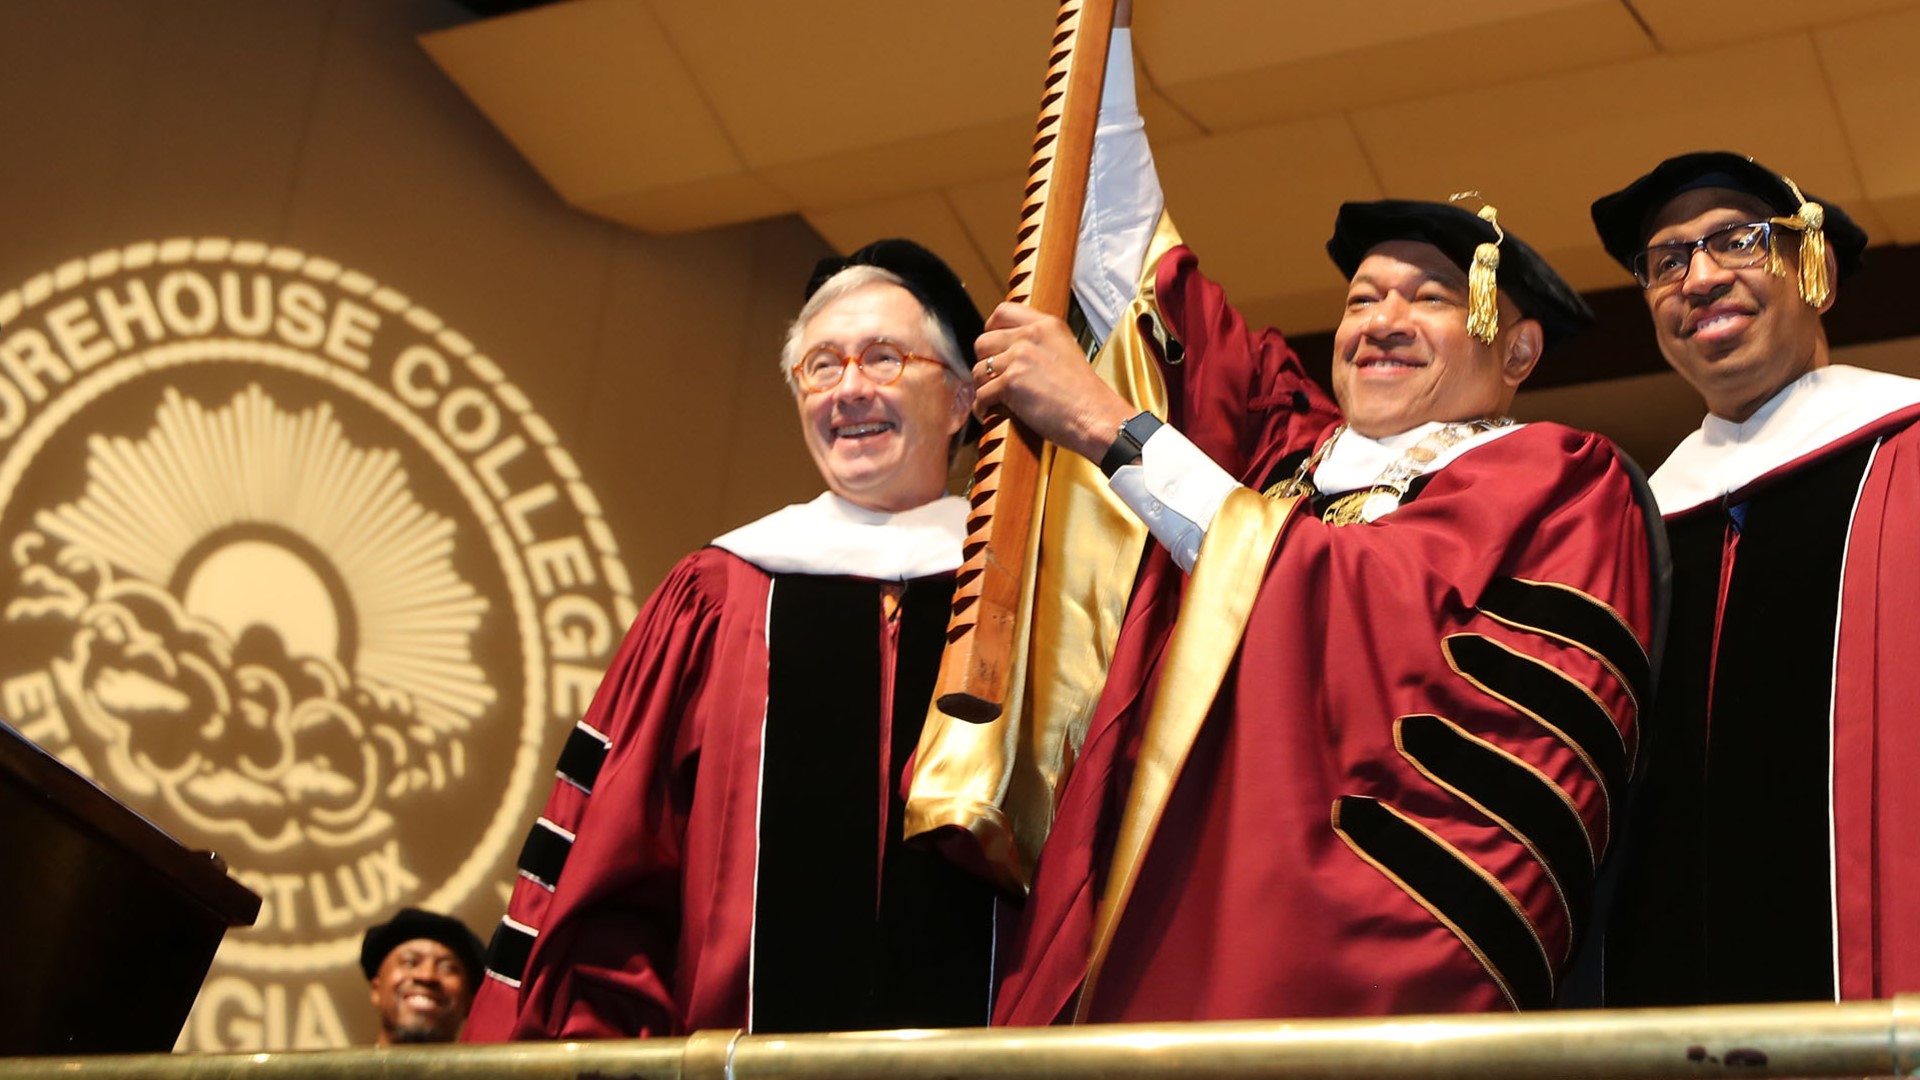 Dr. David A. Thomas was installed as the 12th President of Morehouse College.